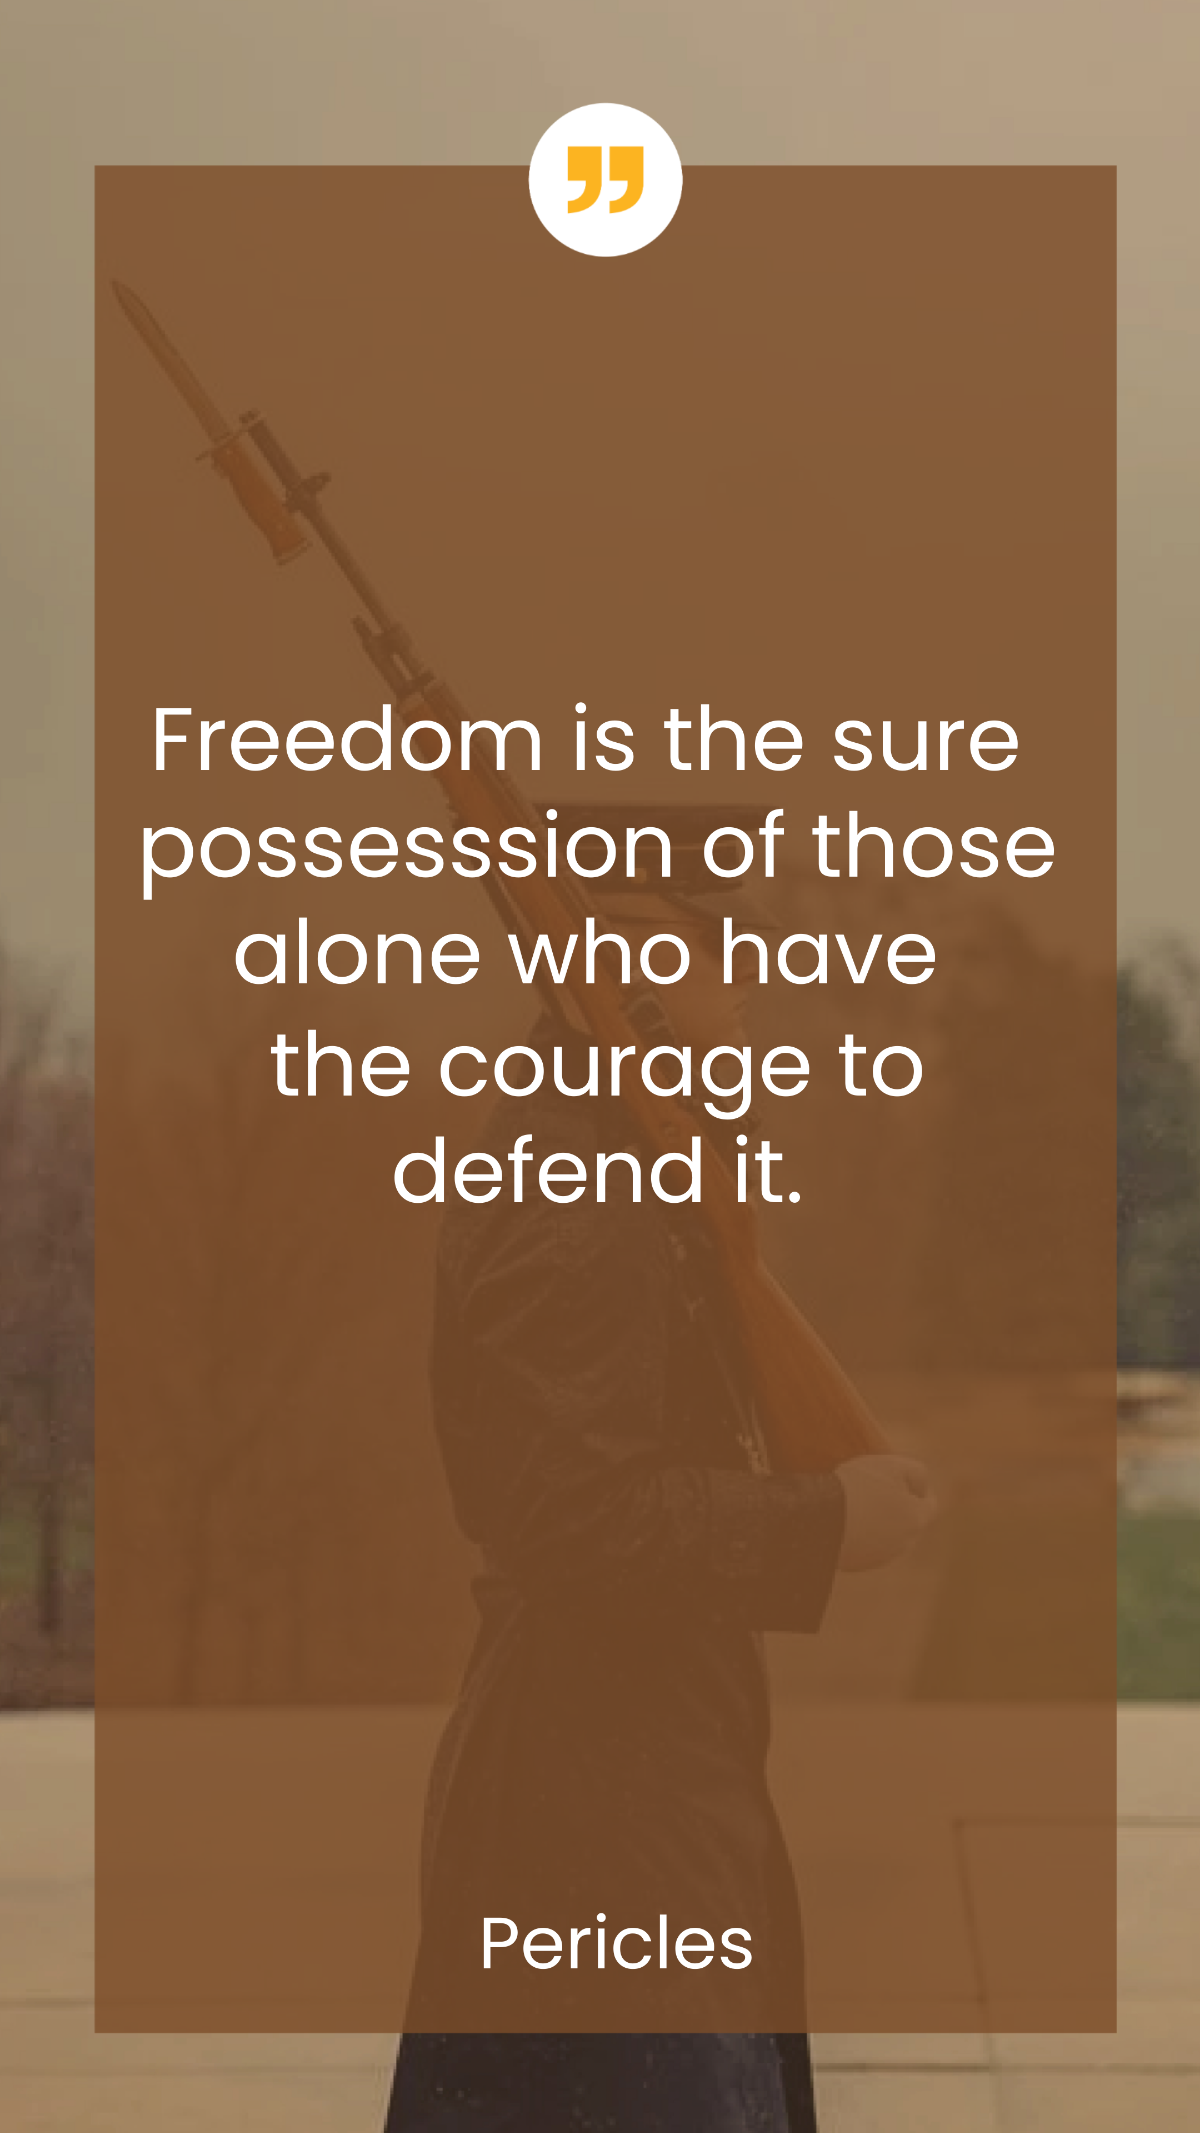 Pericles - Freedom is the sure possession of those alone who have the courage to defend it. Template